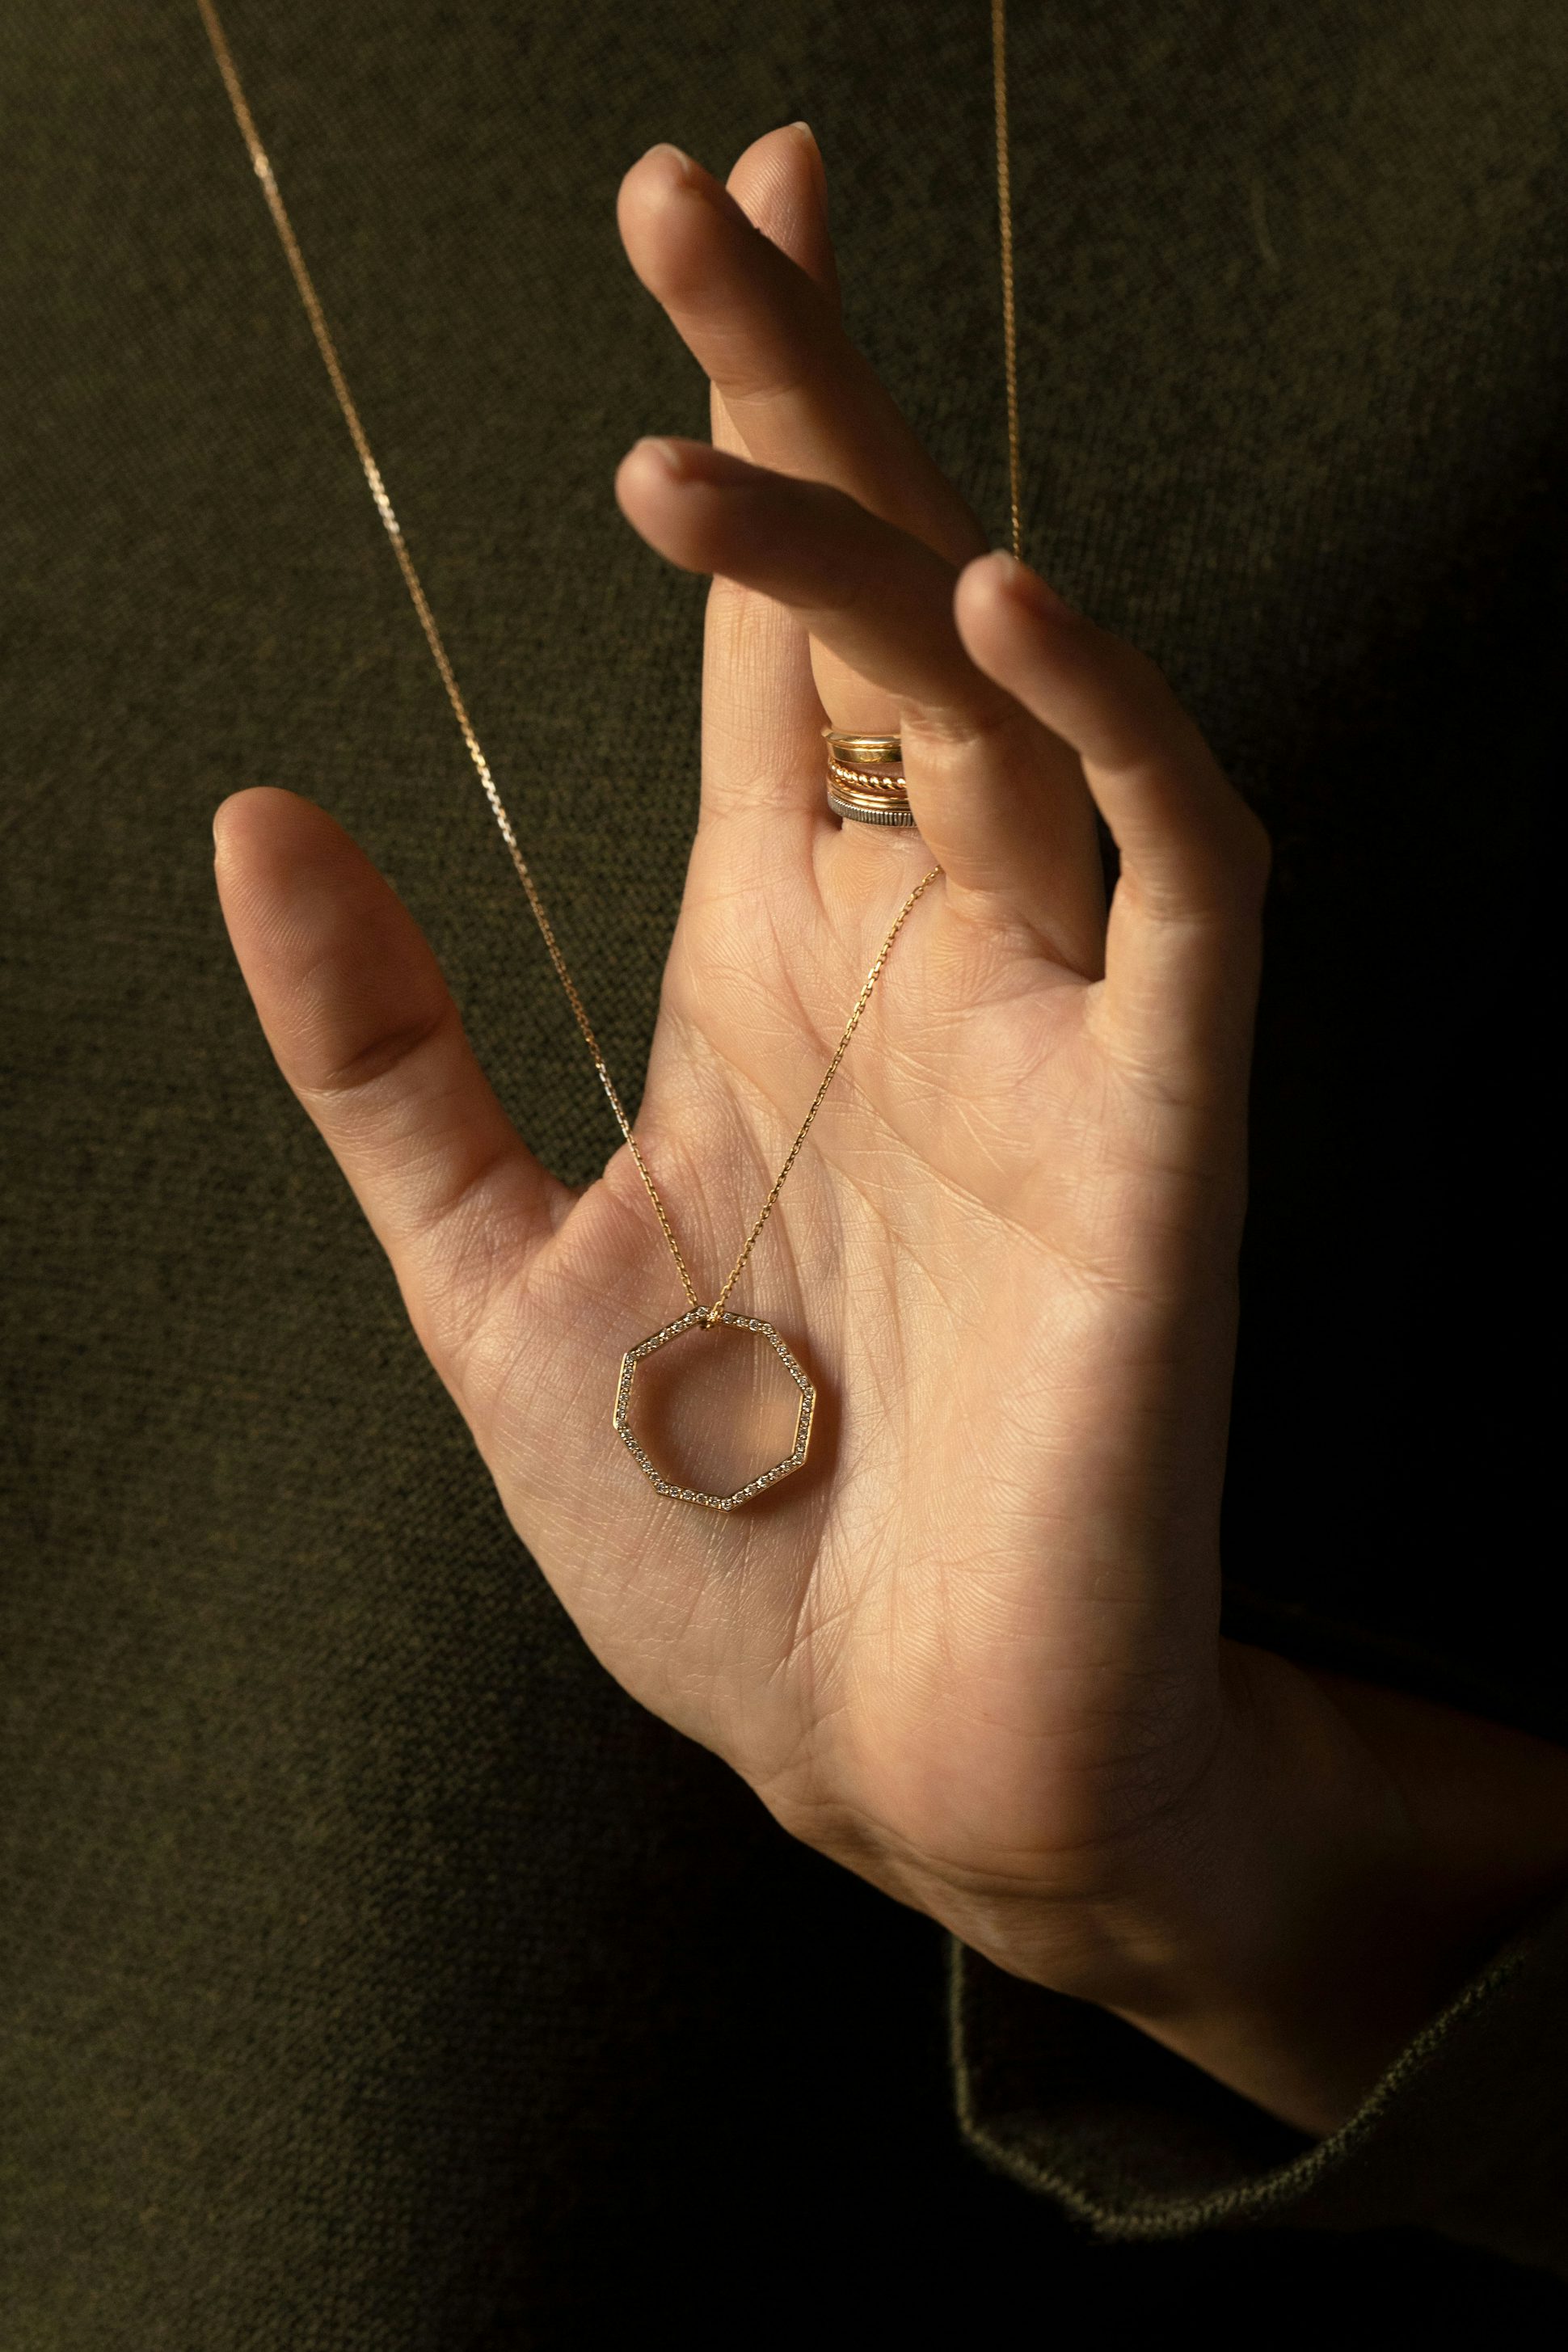 Octogone necklace with a 18mm pendant in 18k Fairmined ethical rose gold, paved with lab-grown diamonds, on a 88cm chain.